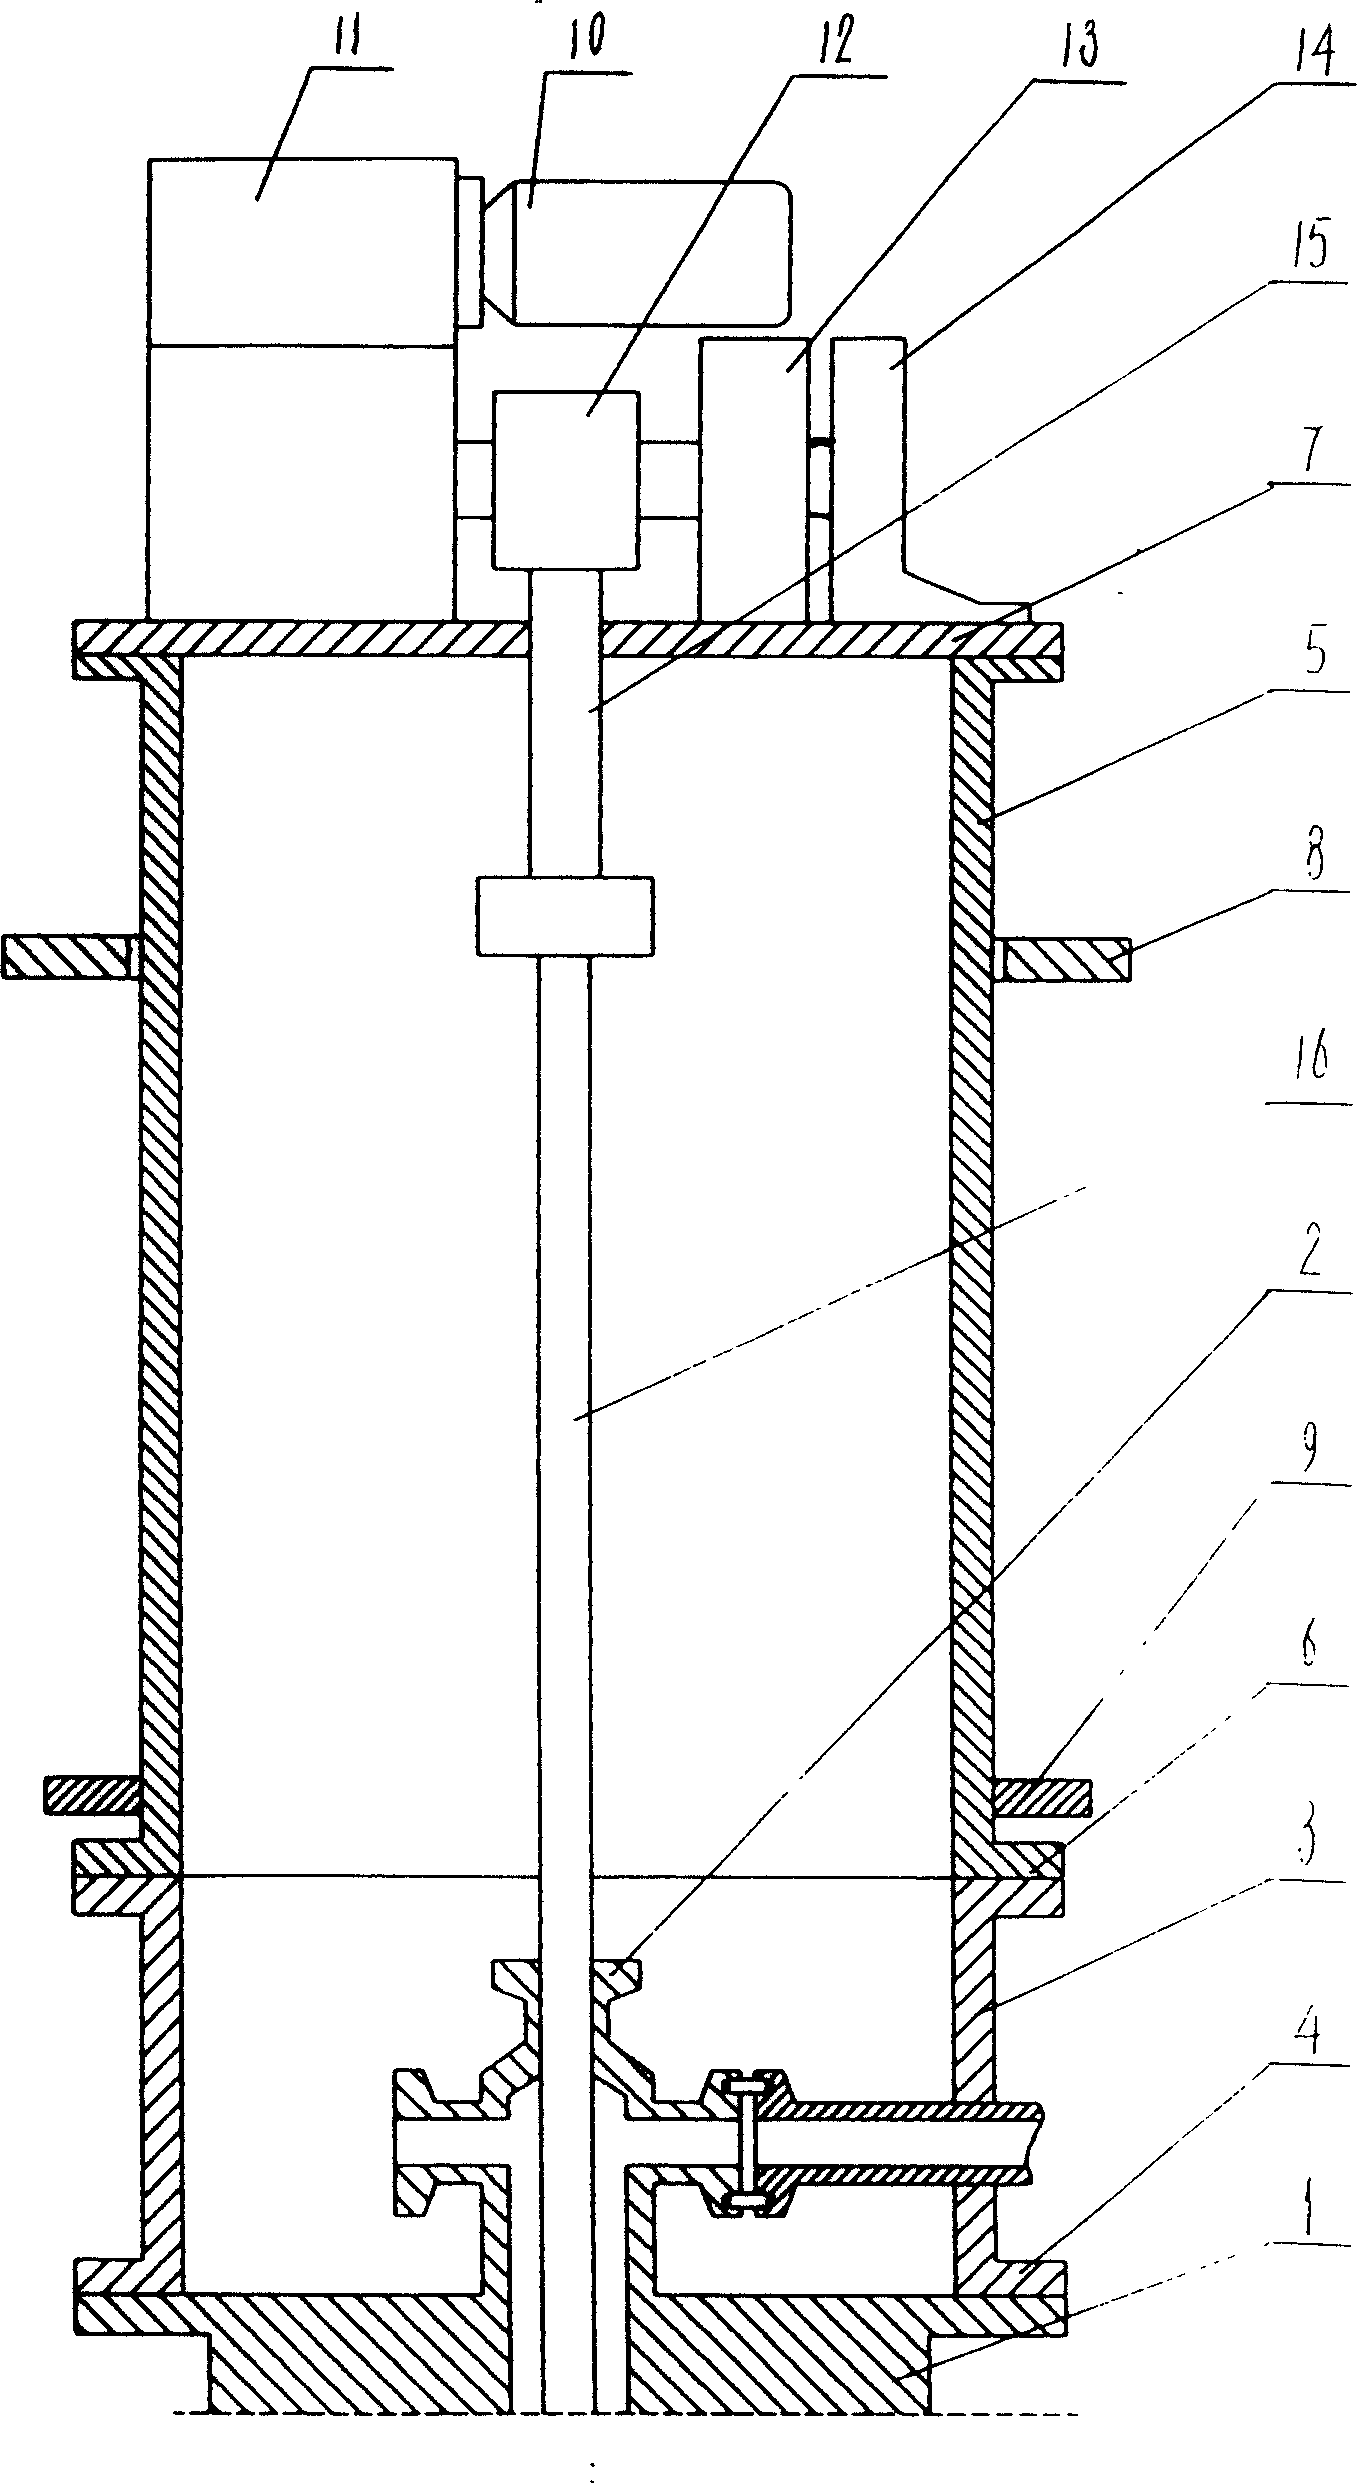 Vertical pipe reciprocating chain pumping unit